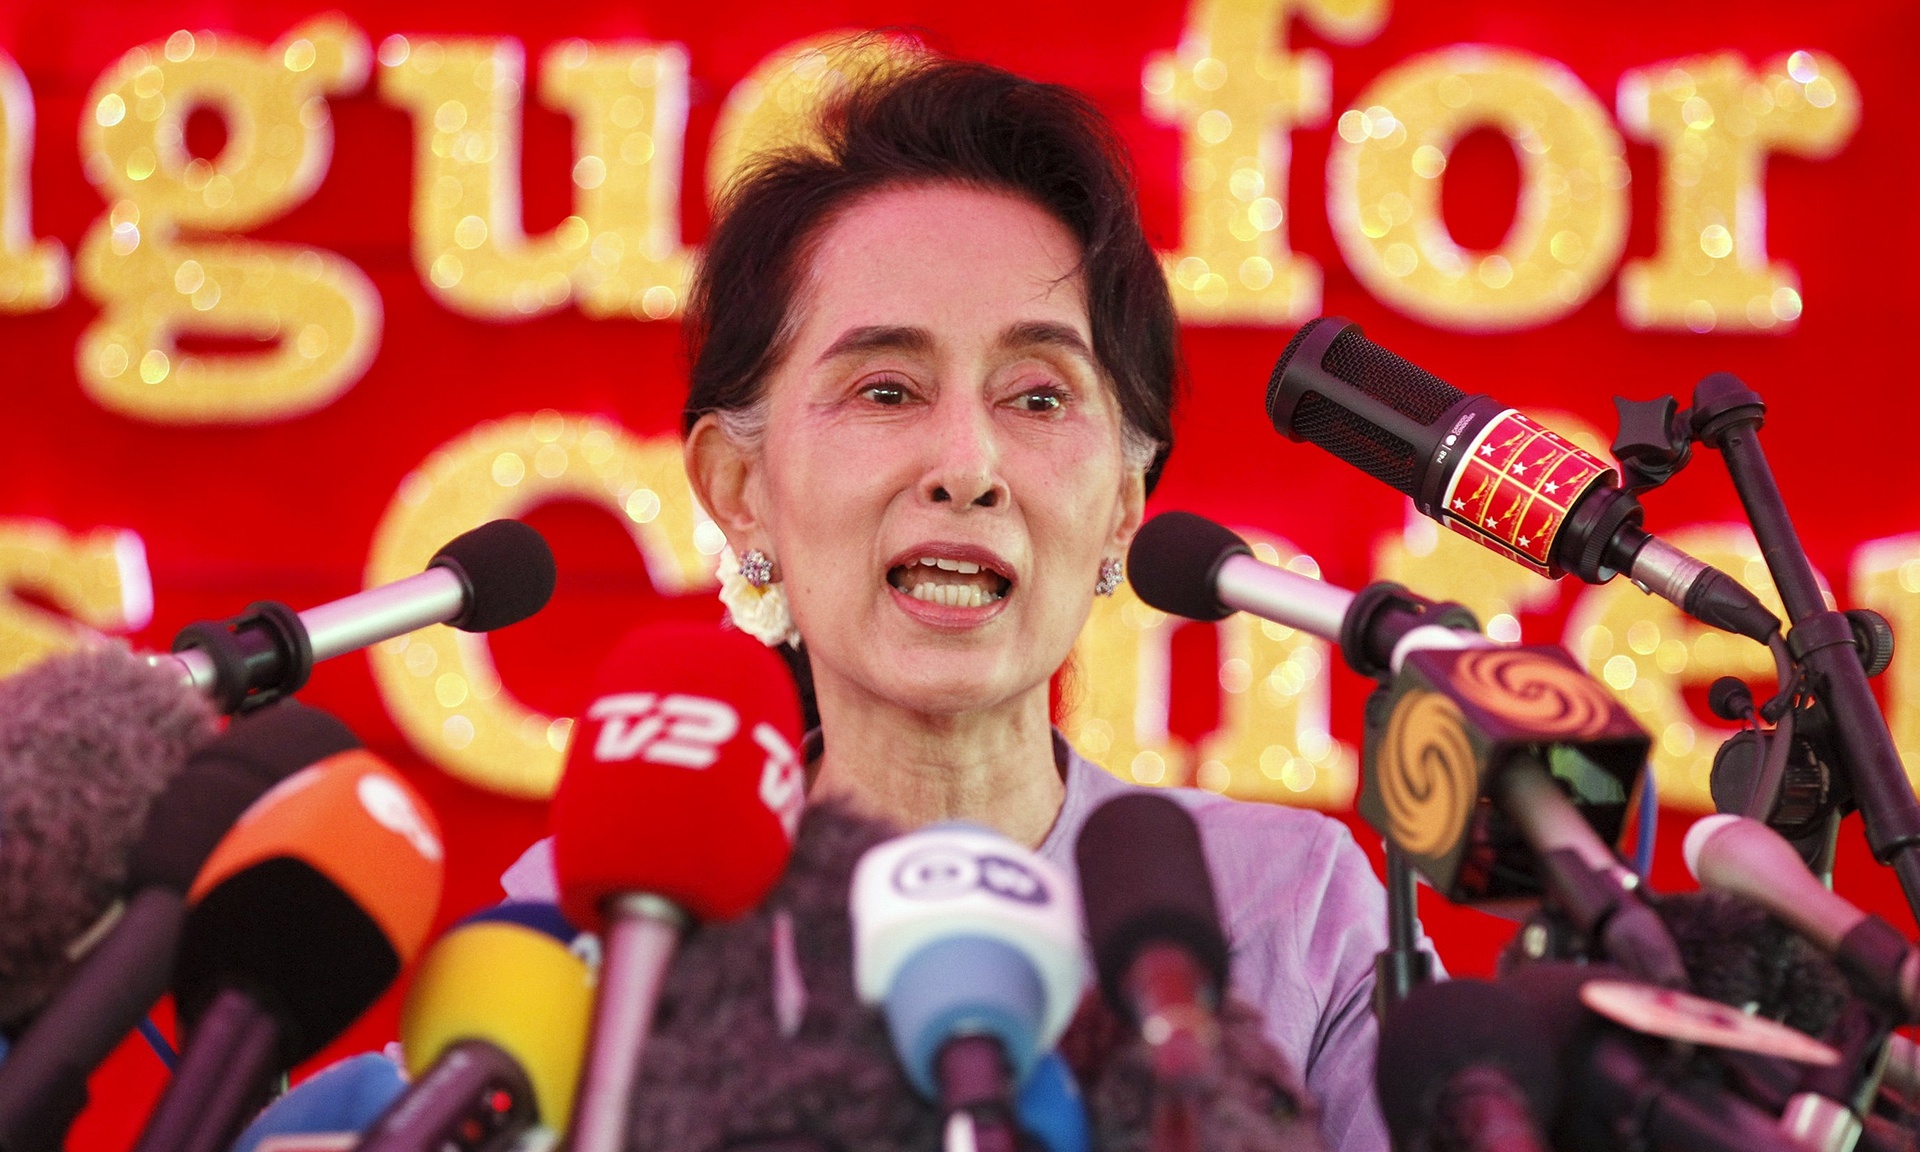 Aung San Suu Kyi speaks to media about the upcoming general elections, during a news conference at her home in Yangon on Thursday. (Photo credit: Soe Zeya Tun/Reuters)